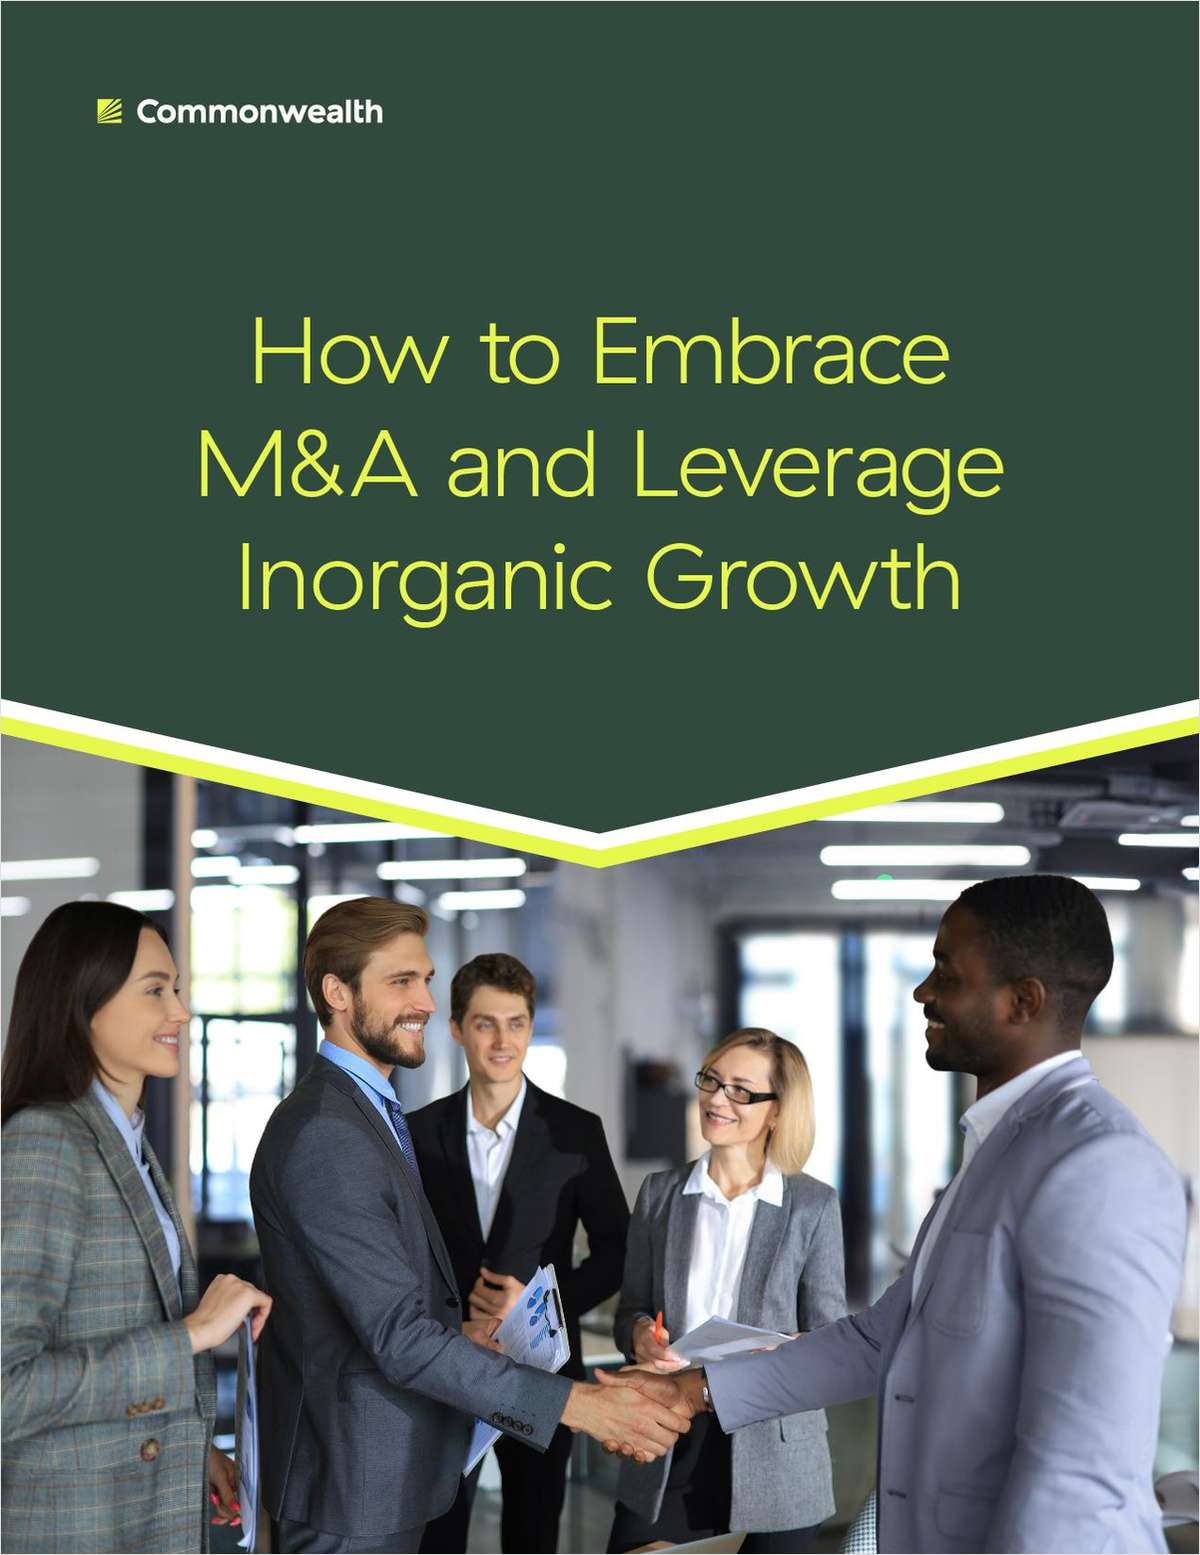 How to Embrace M&A and Leverage Inorganic Growth